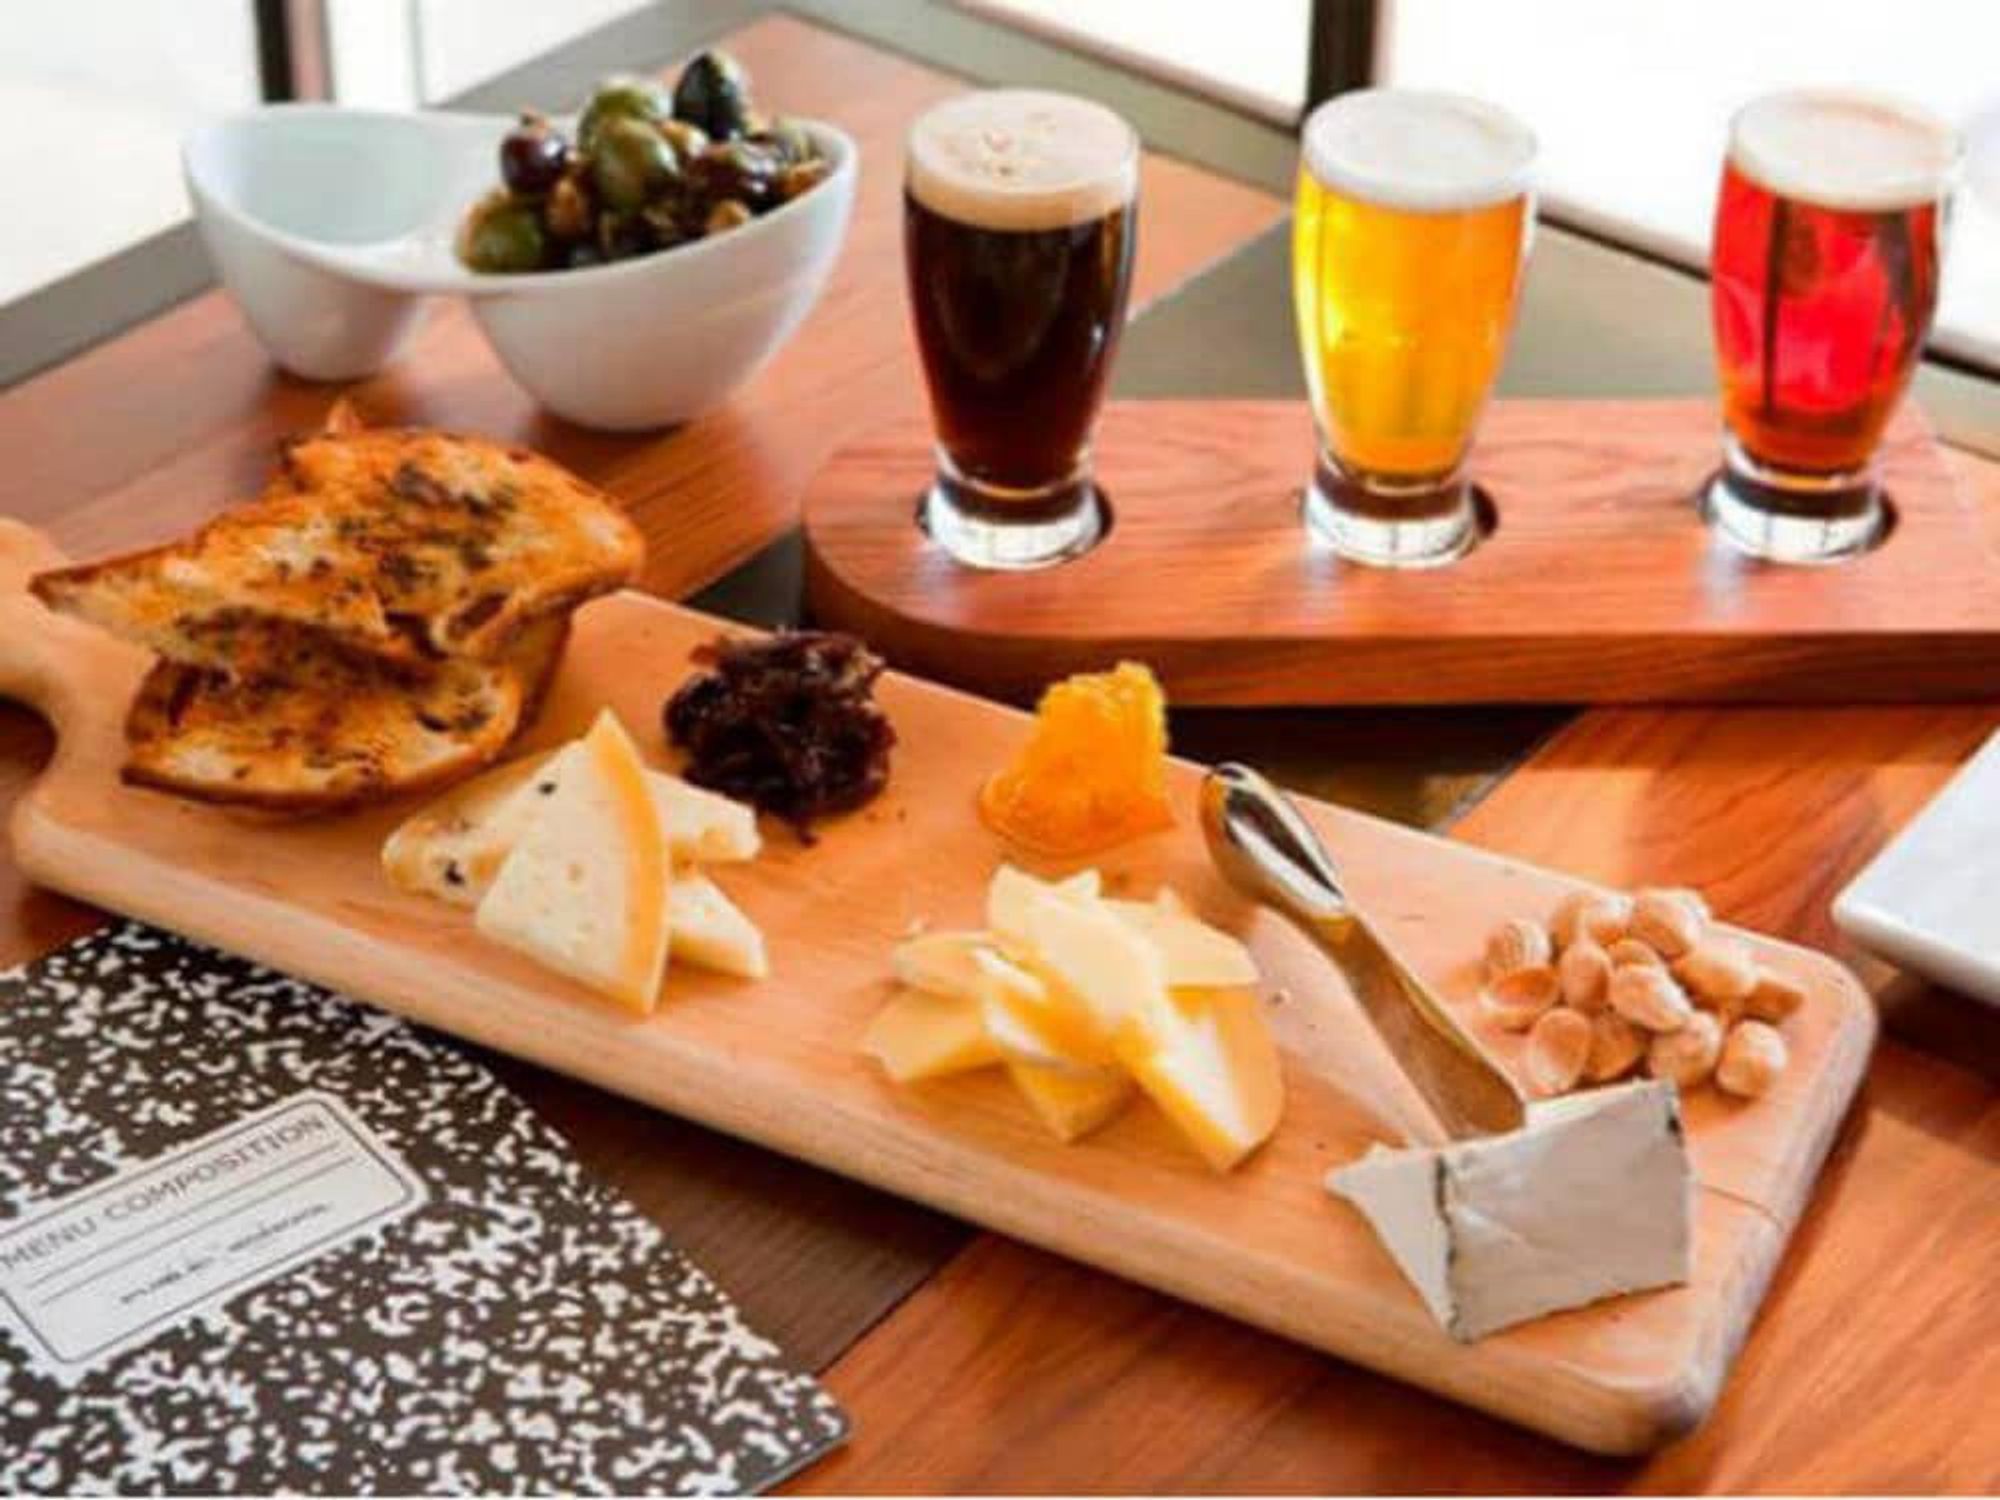 Public School cheese plate and beer sampler